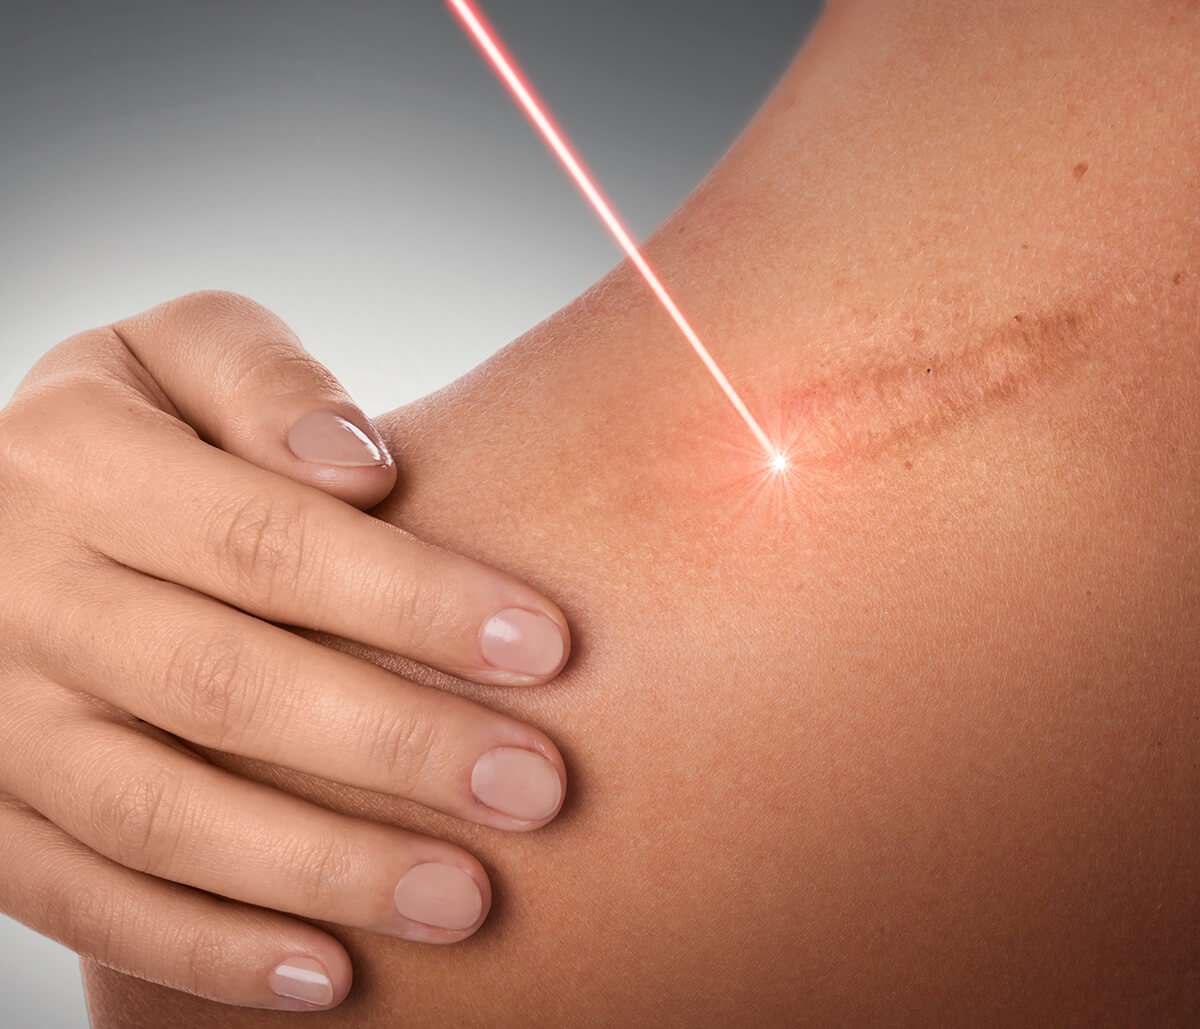 Enjoy Laser Scar Removal with Professional in Washington, DC, Area